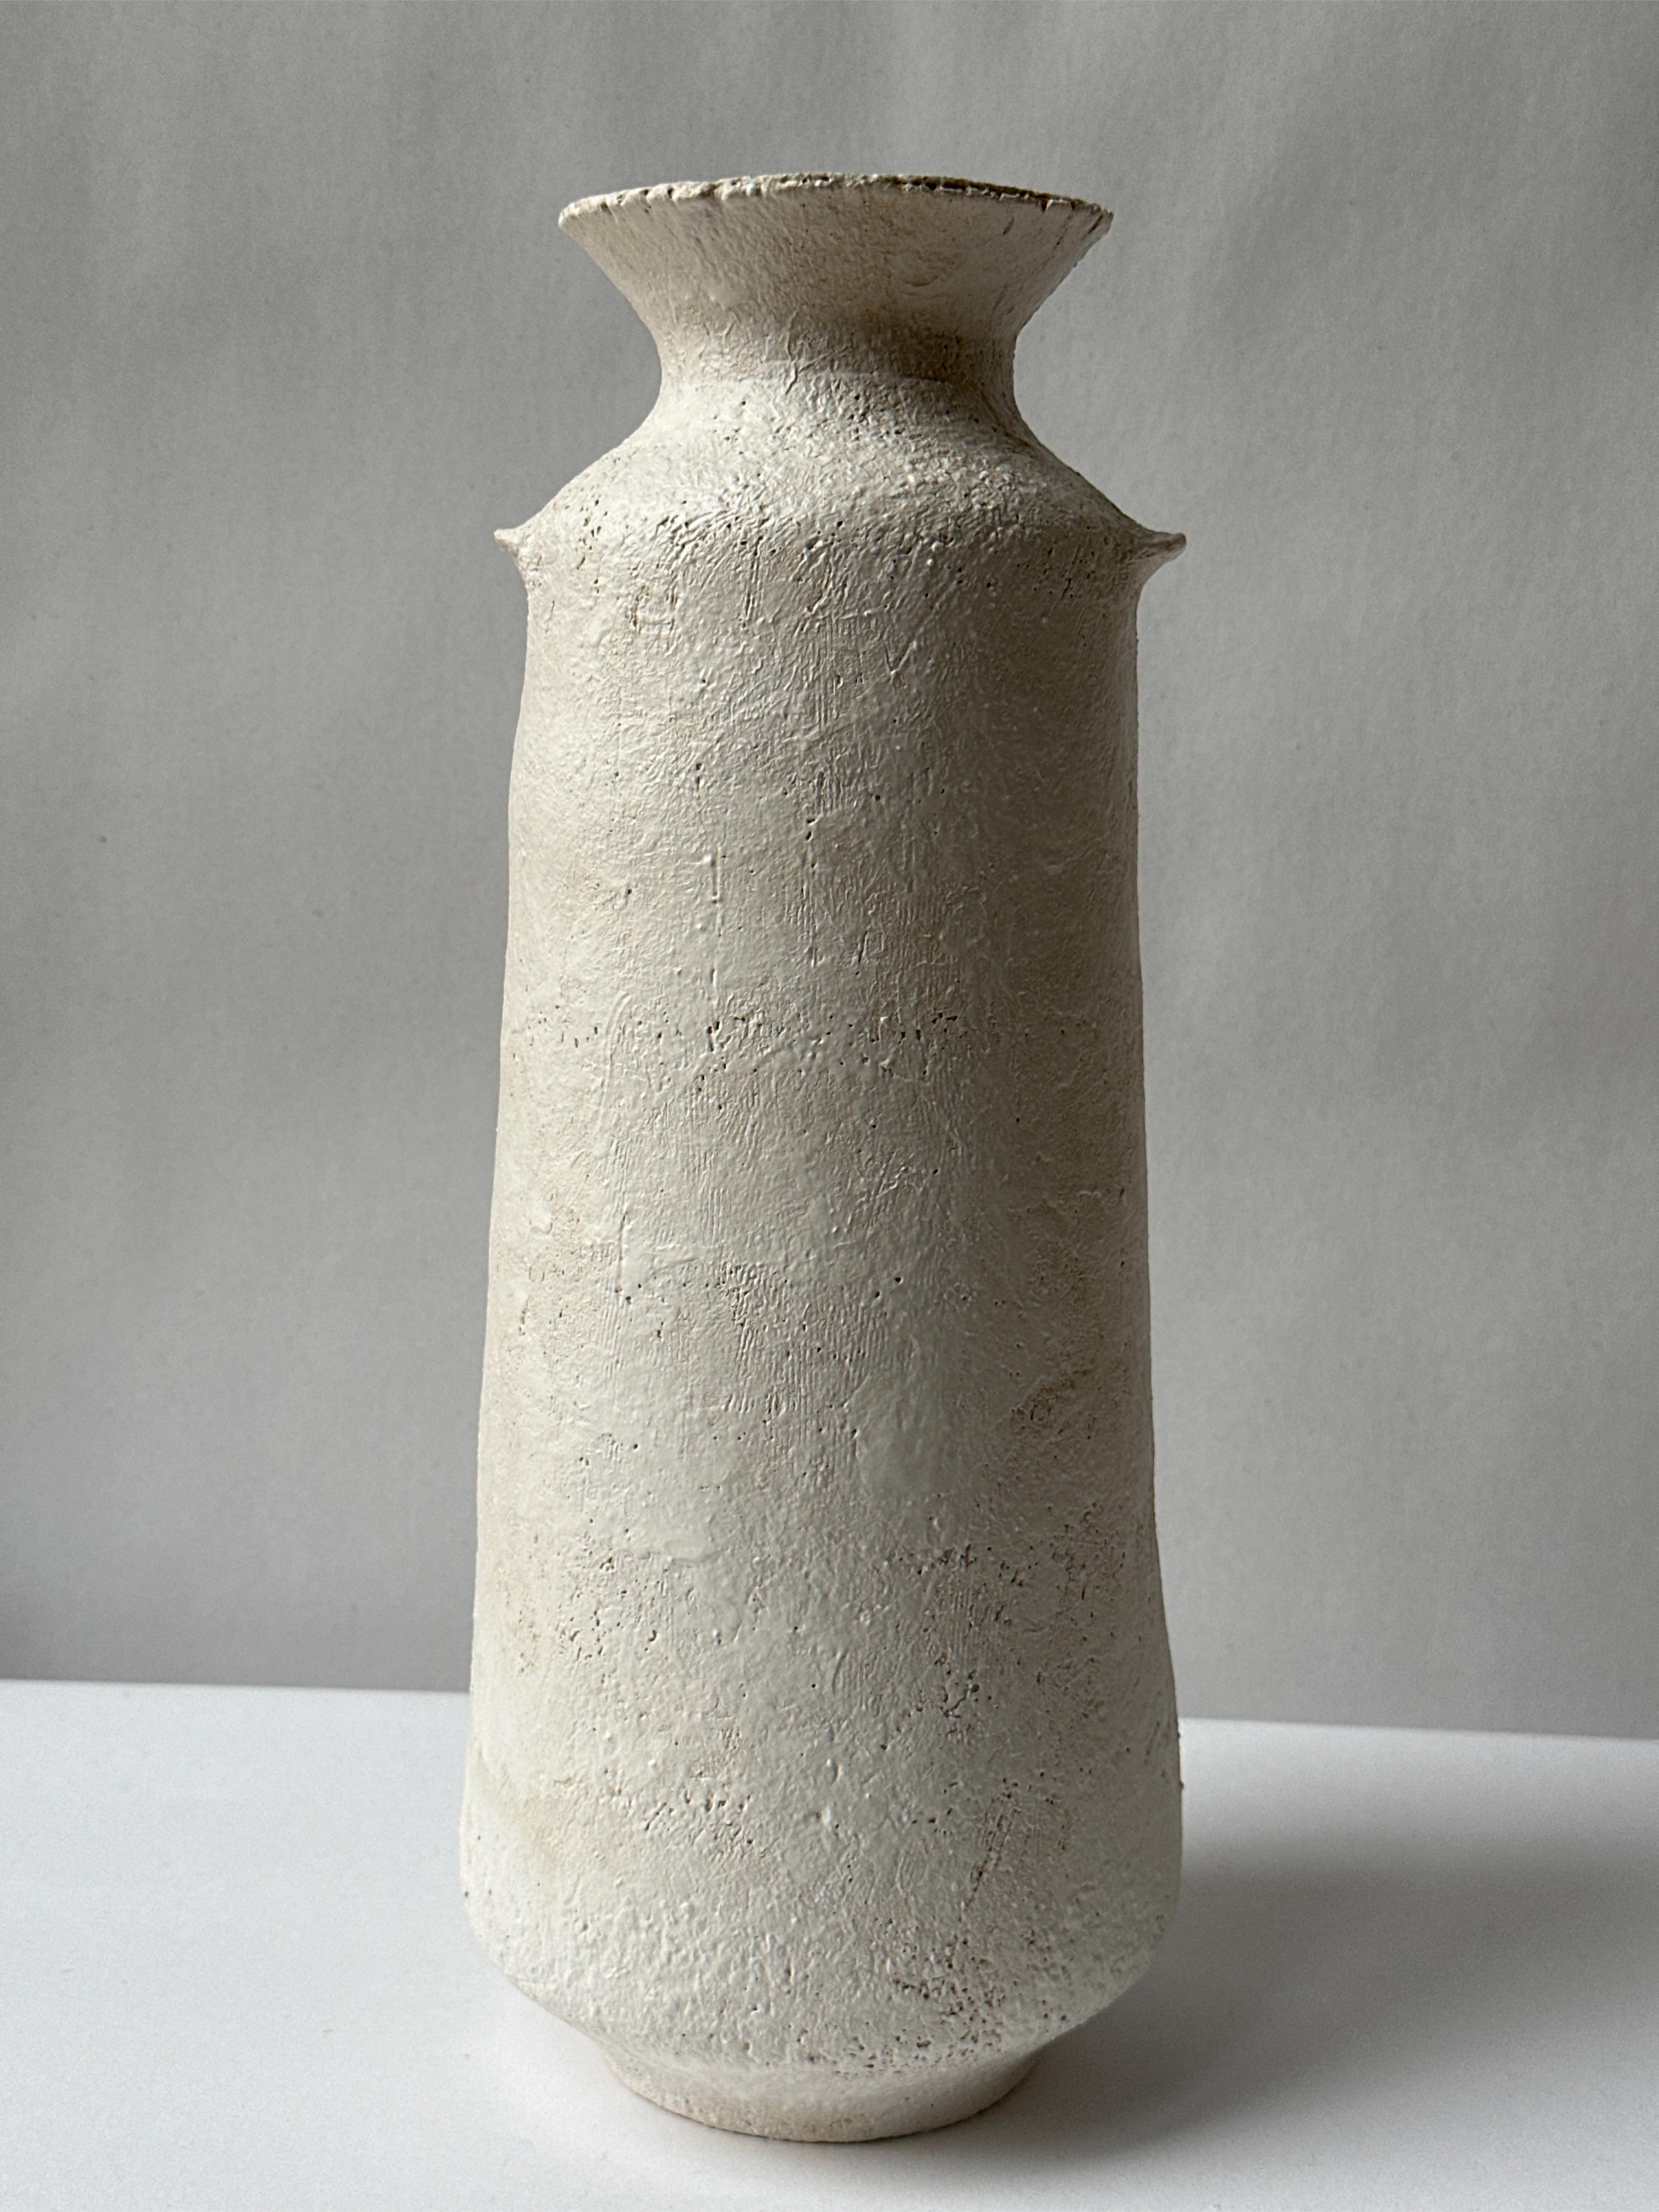 White Stoneware Alavastron Vase by Elena Vasilantonaki
Unique
Dimensions: ⌀ 20 x H 40 cm (Dimensions may vary)
Materials: Stoneware
Available finishes: White, Red, Black, Brown, Black, White Patina

Growing up in Greece I was surrounded by pottery